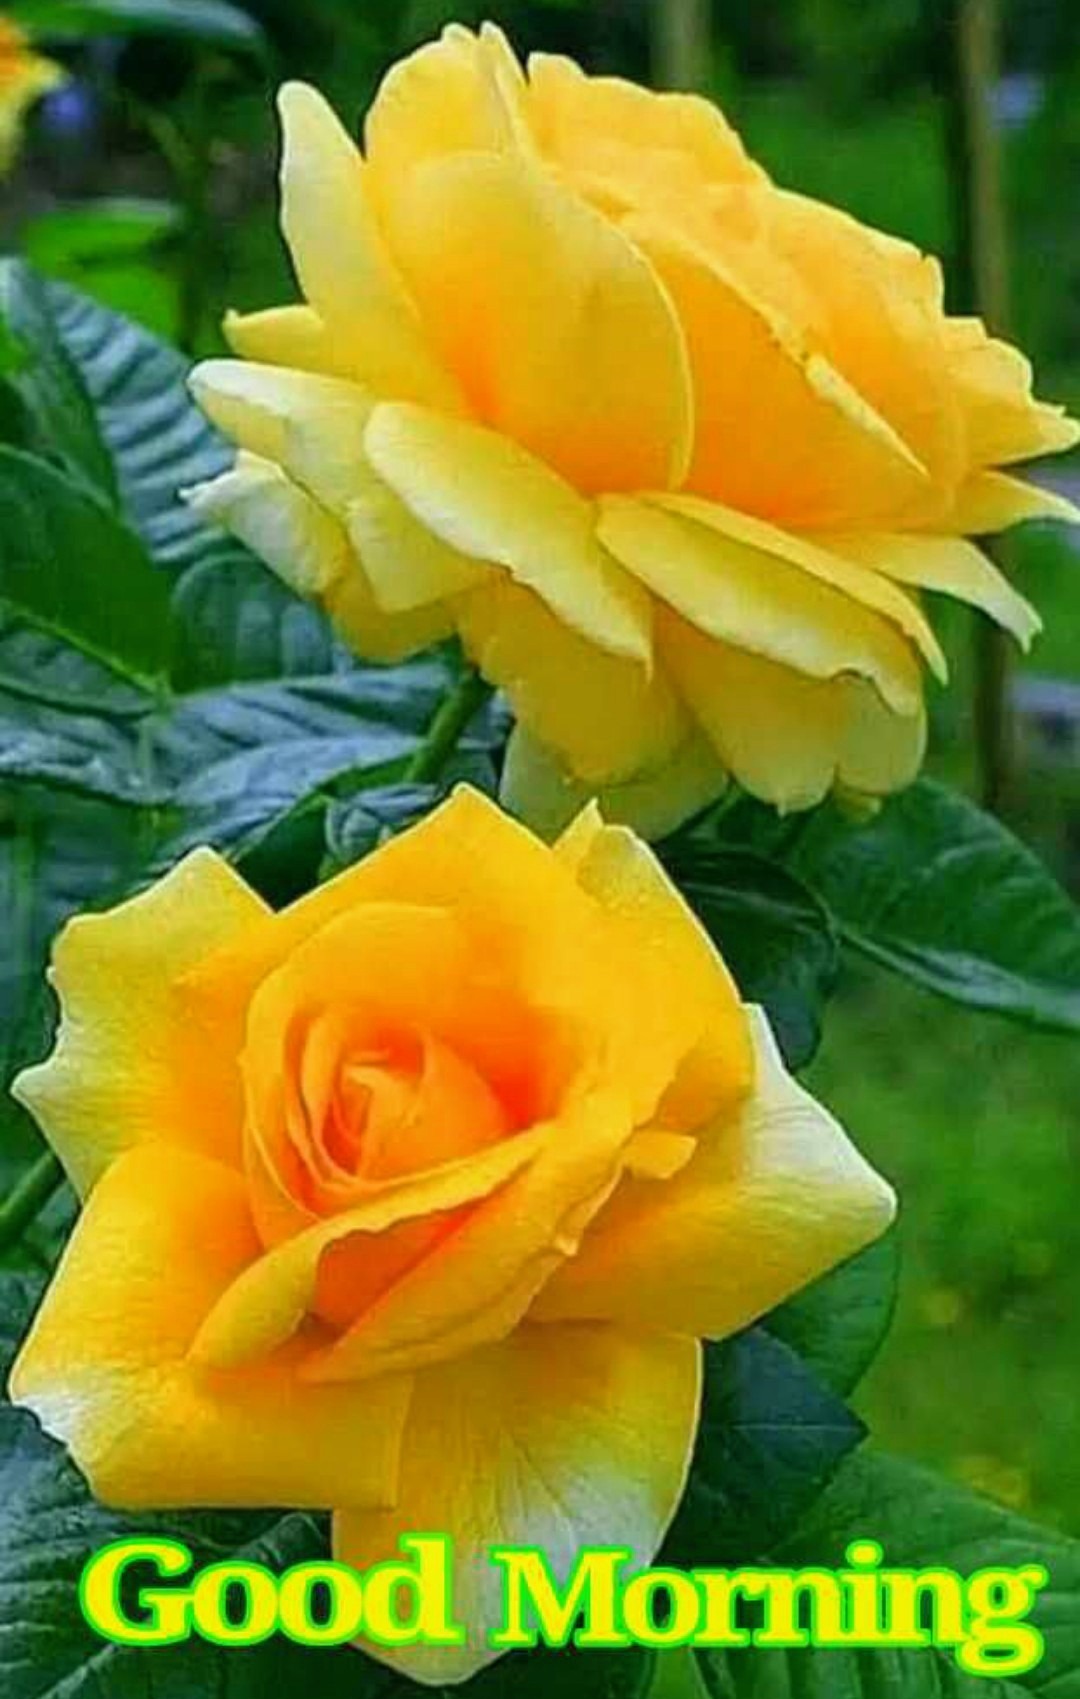 Good Morning With Yellow Roses - DesiComments.com